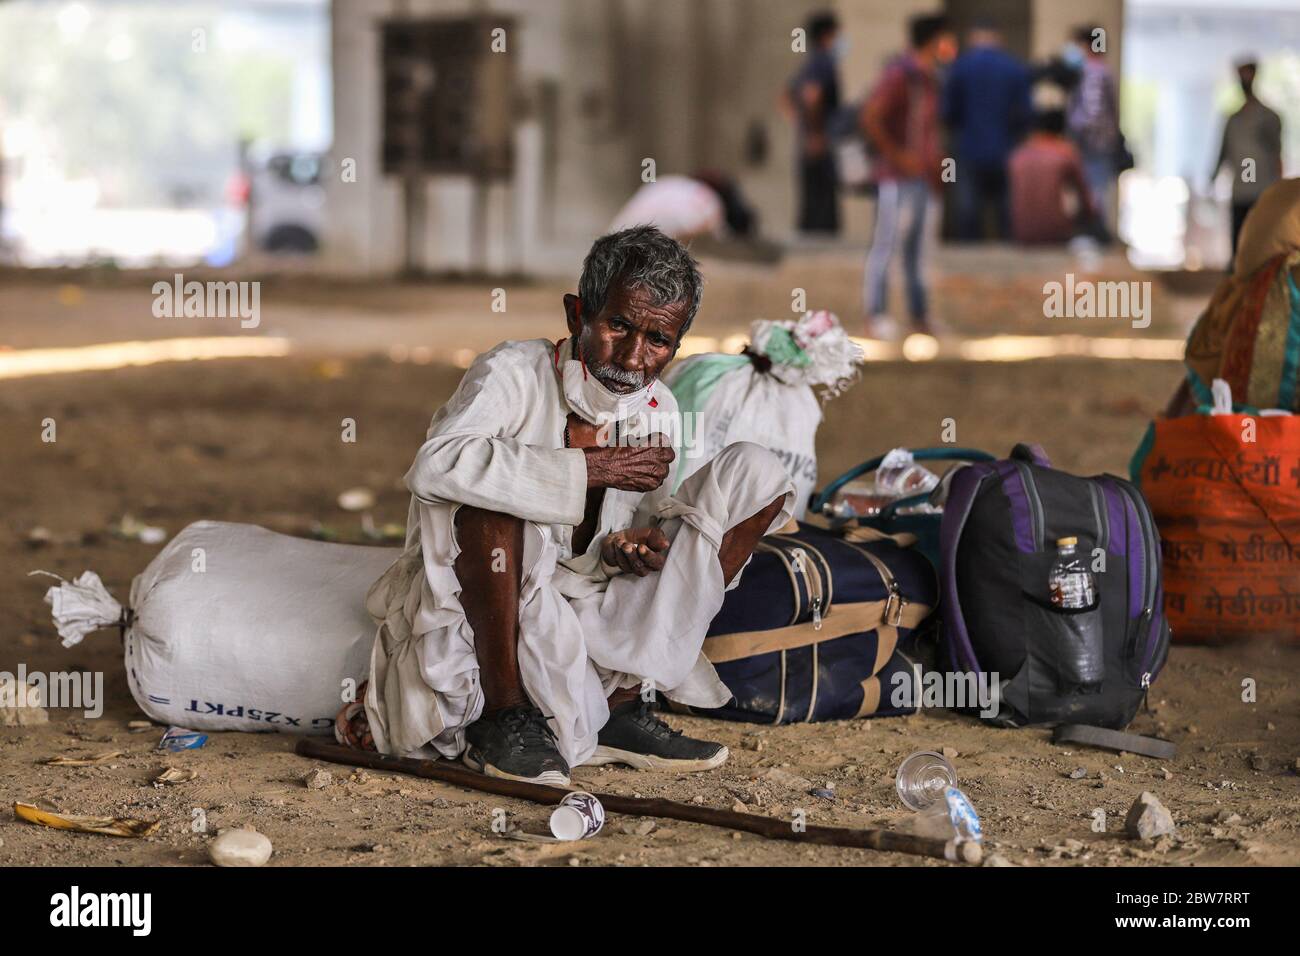 Delhi, India. 18th May, 2020. A Migrant worker seen with his luggage under a flyover waiting for transportation.Due to massive job losses after the lockdown put in place to contain the coronavirus pandemic, most migrant workers with their families are returning to their villages. Credit: Amarjeet Kumar Singh/SOPA Images/ZUMA Wire/Alamy Live News Stock Photo